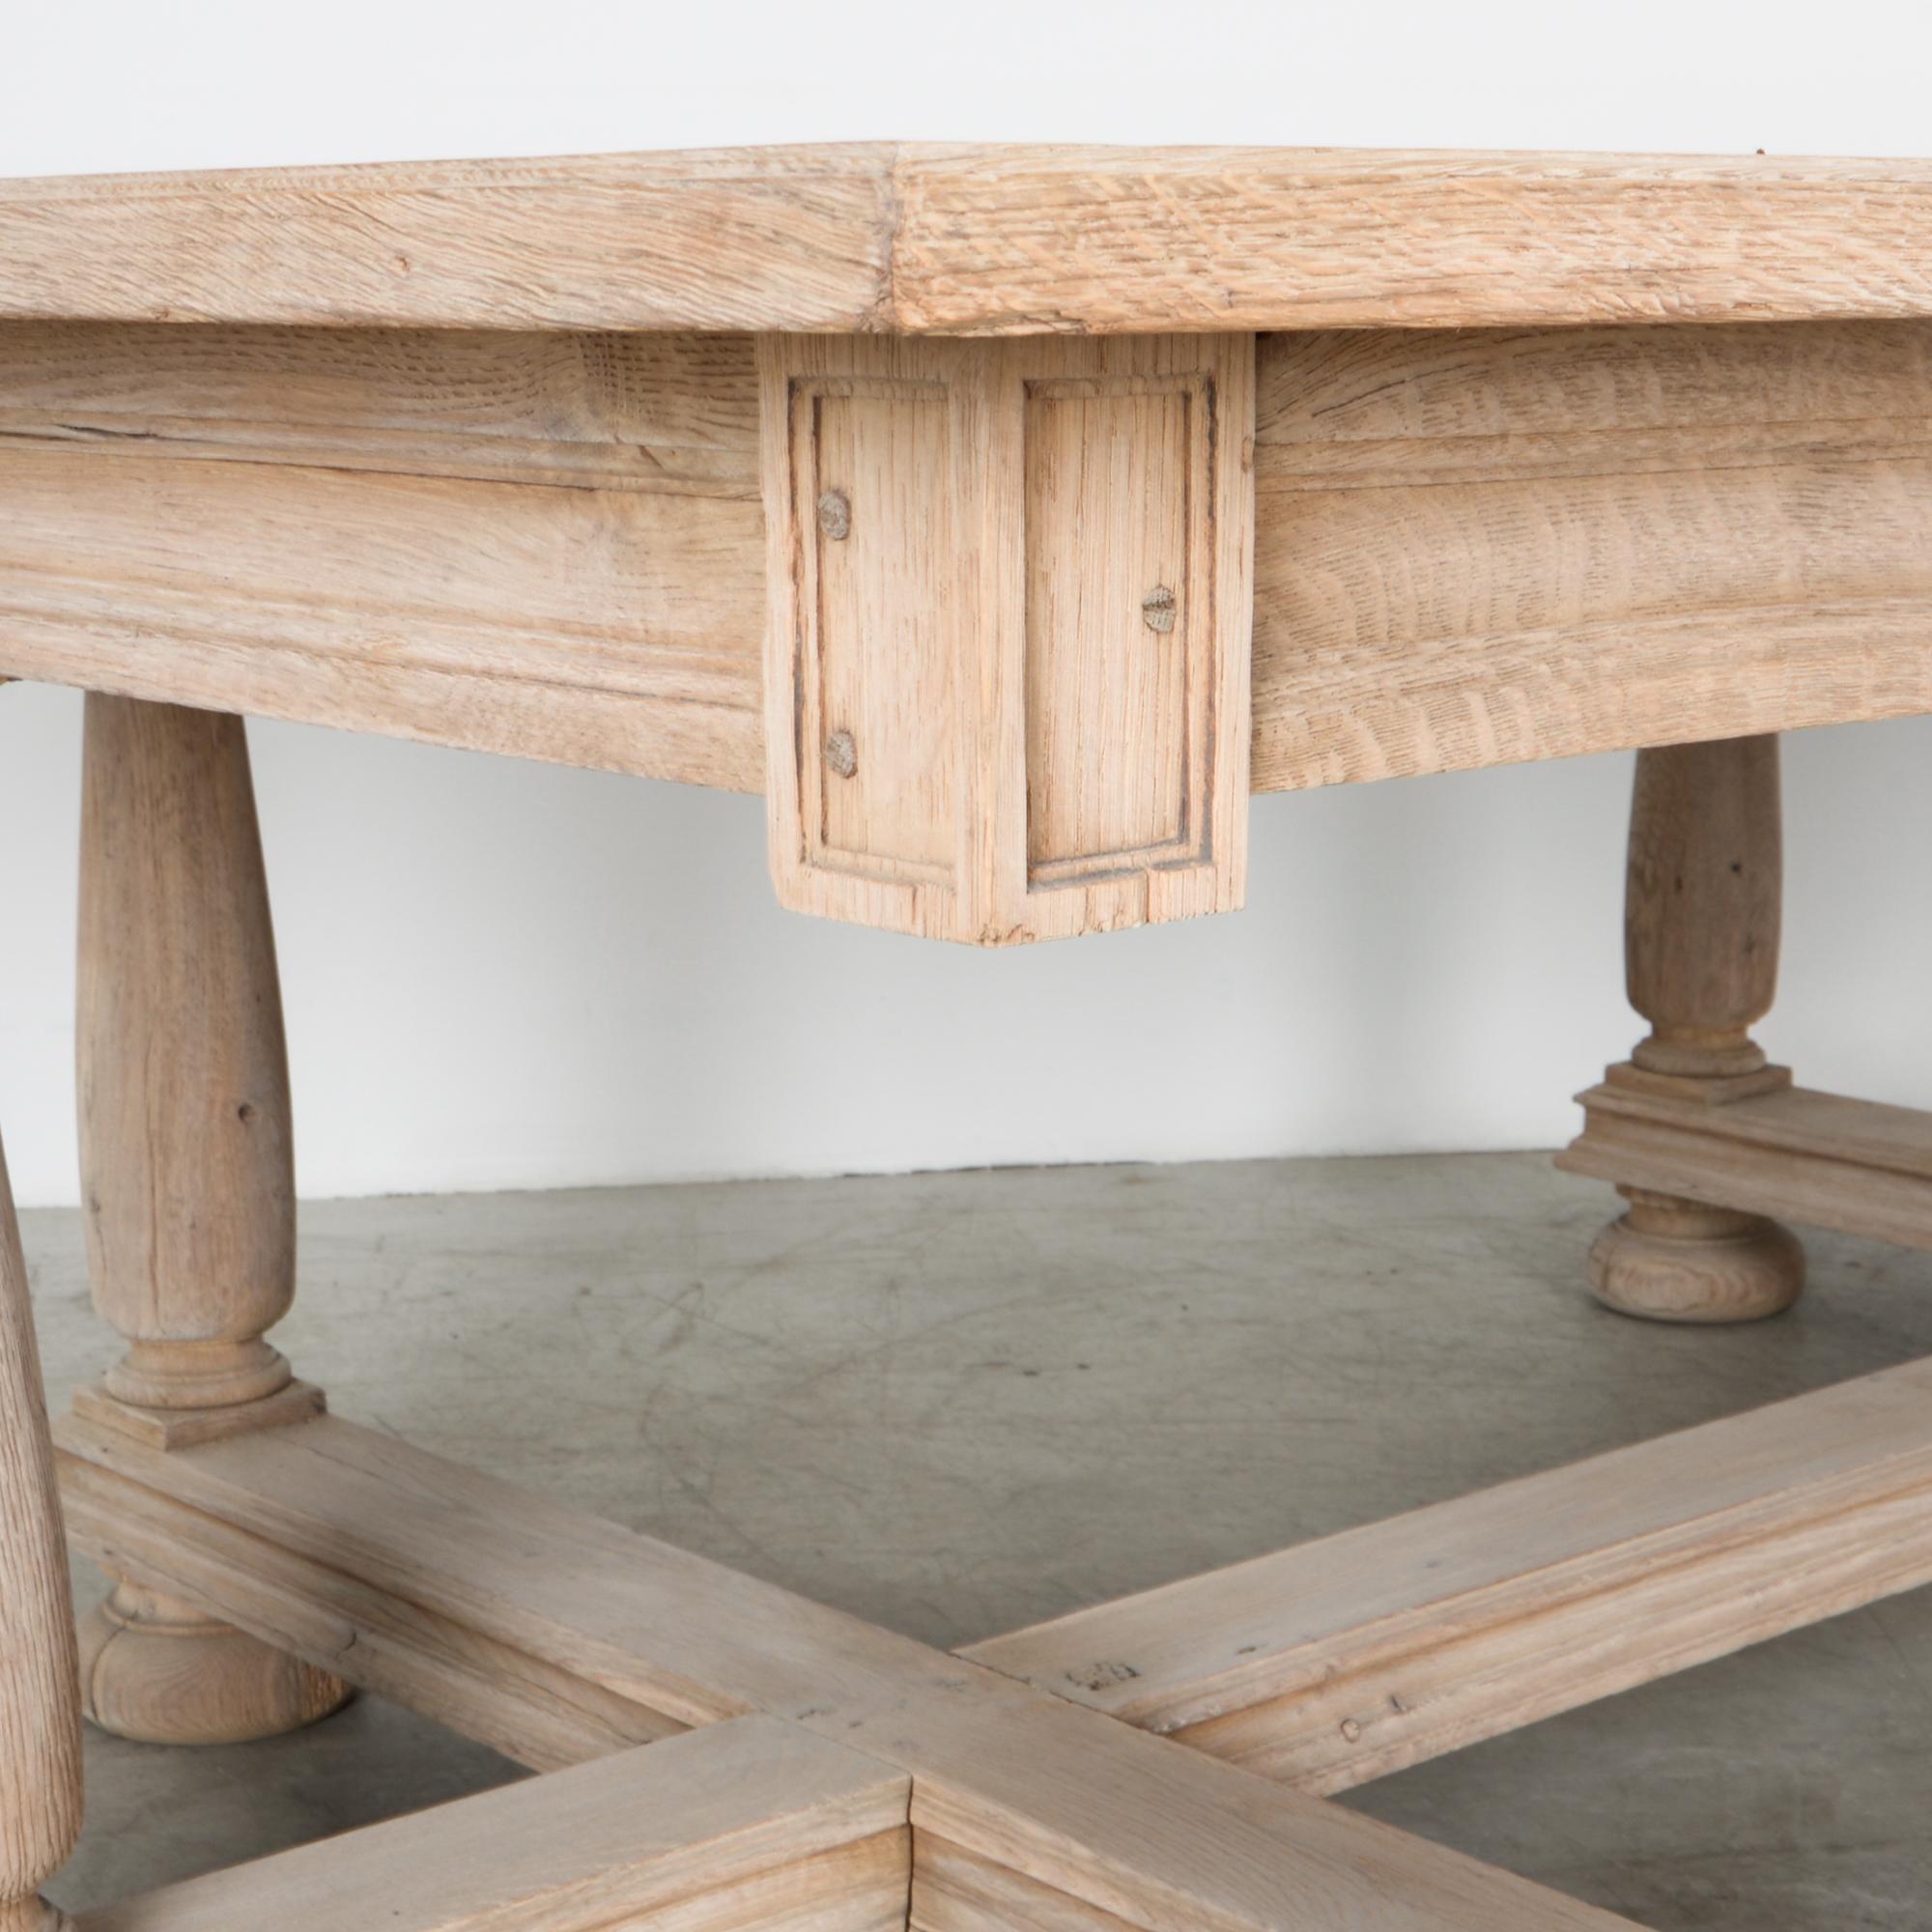 From late 19th century England, an impressive deep dining table in oak. A worn patina gives this piece a great sense of history, enhancing its unique shape. Thick stretchers cross, bracing a configuration of six table legs. Superficial cracks run on